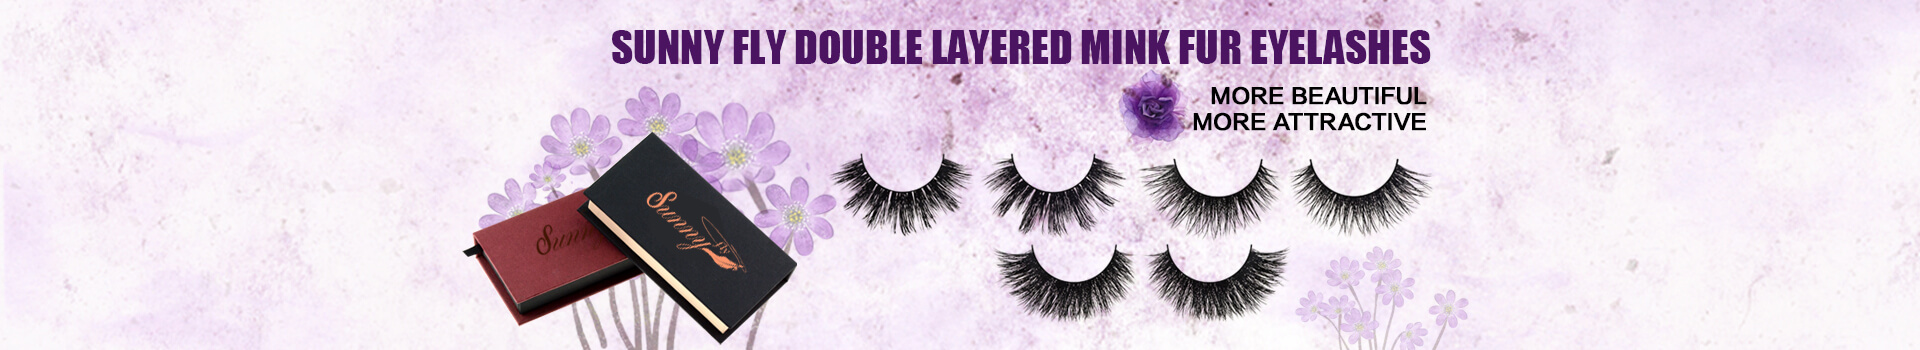 Double Layered Nerz Wimpern MD21